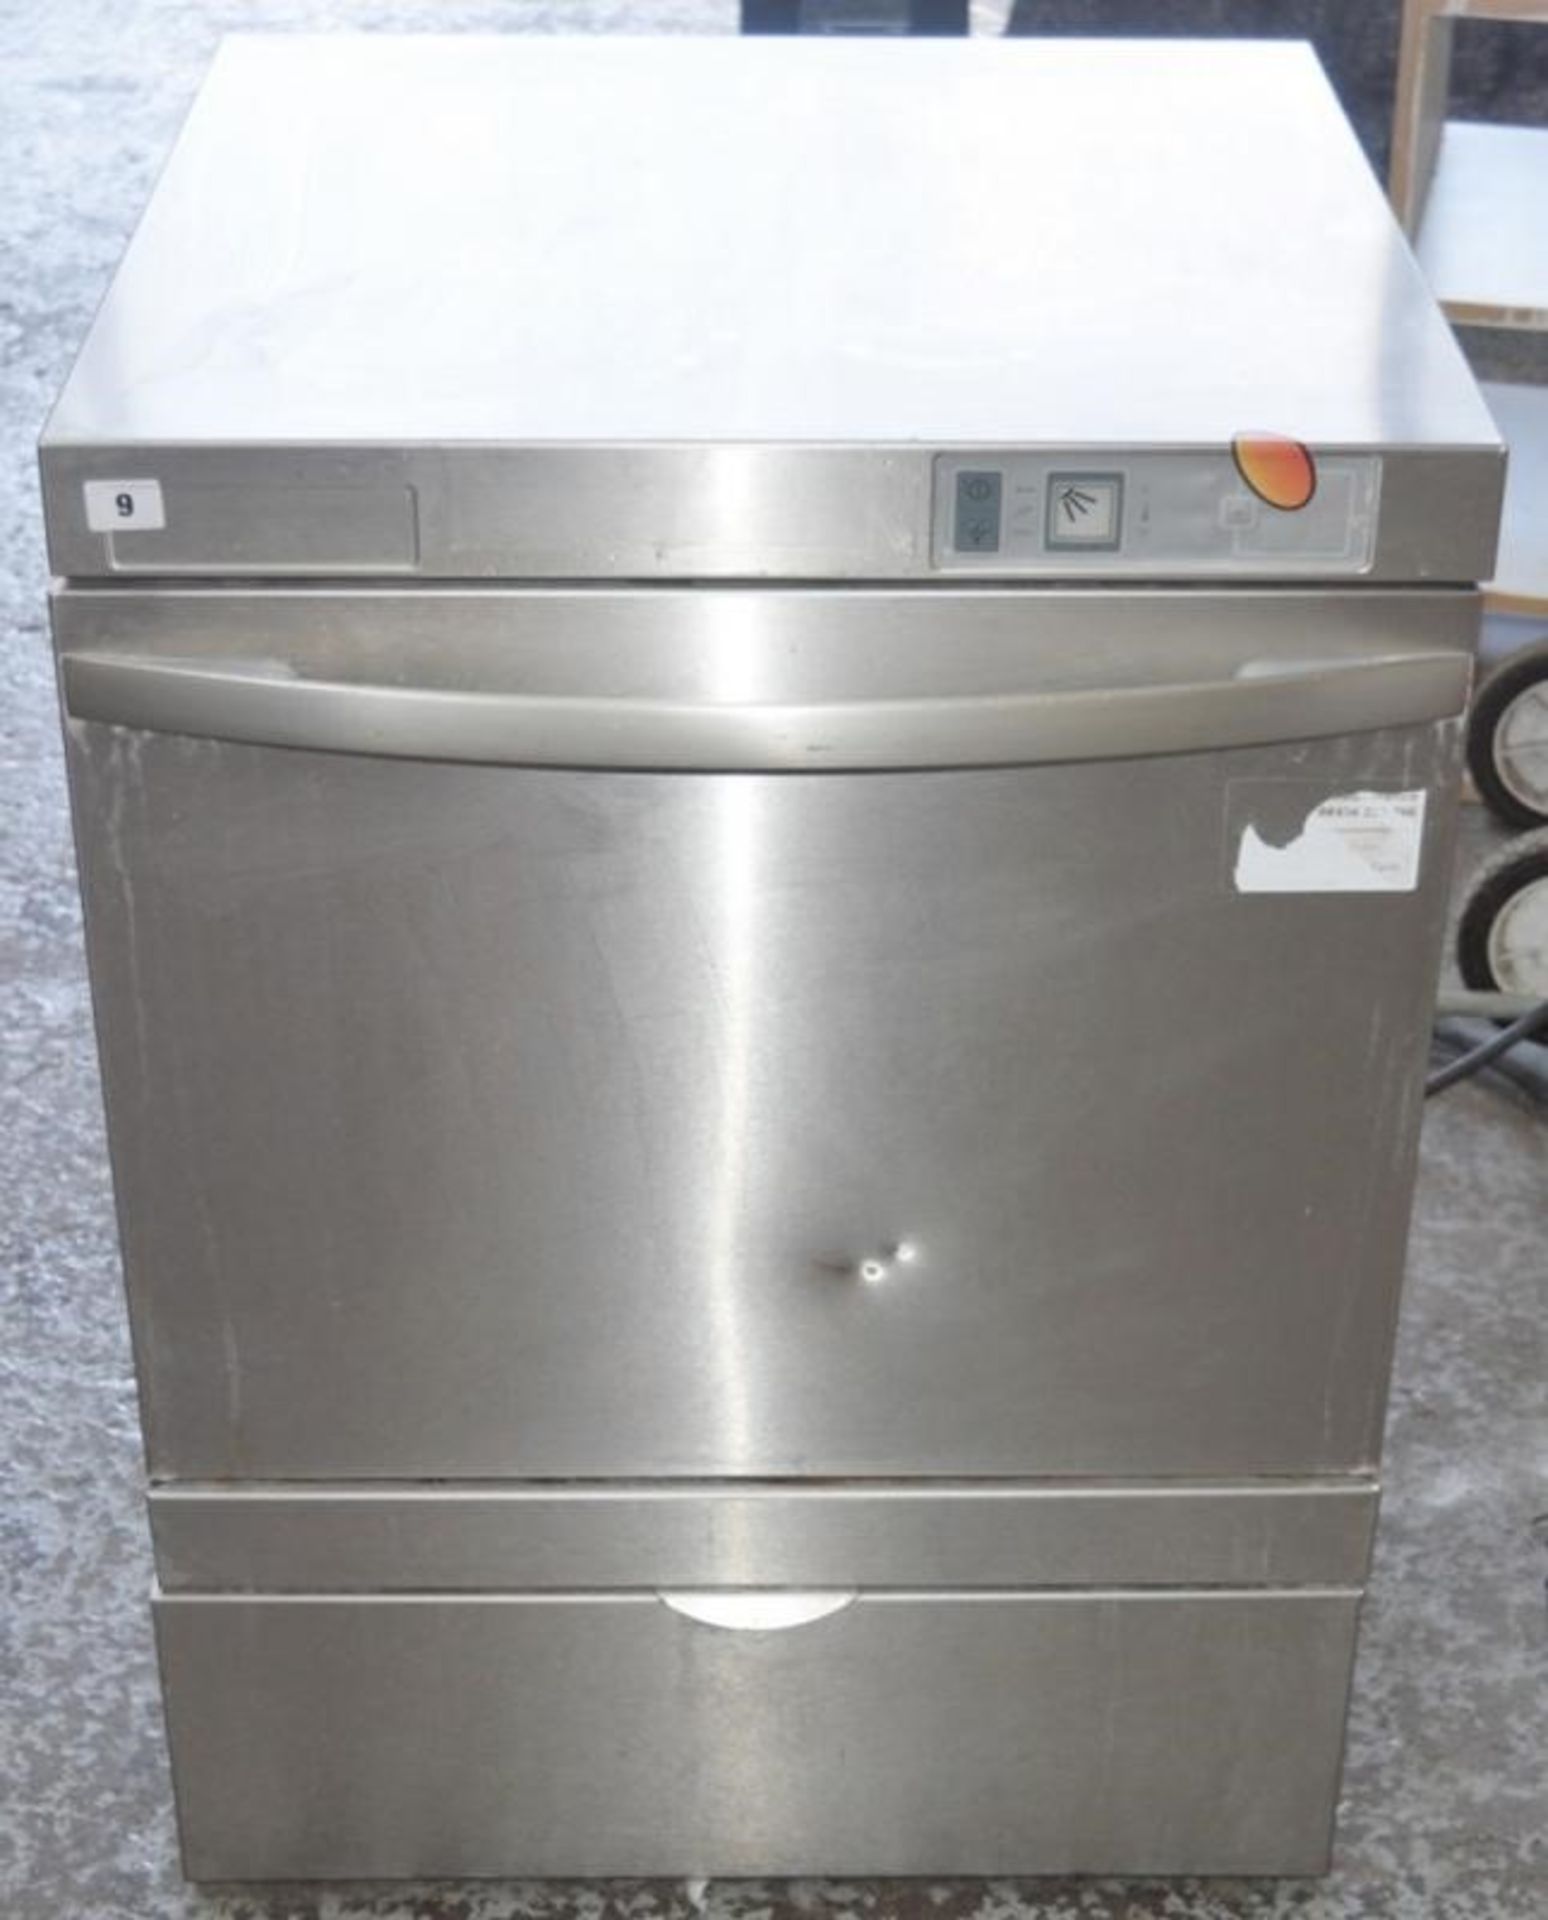 1 x Commercial Dishwasher - Stainless Steel Finish - Ref: IT552 - CL007 - Dimensions: H81 x W60 x D6